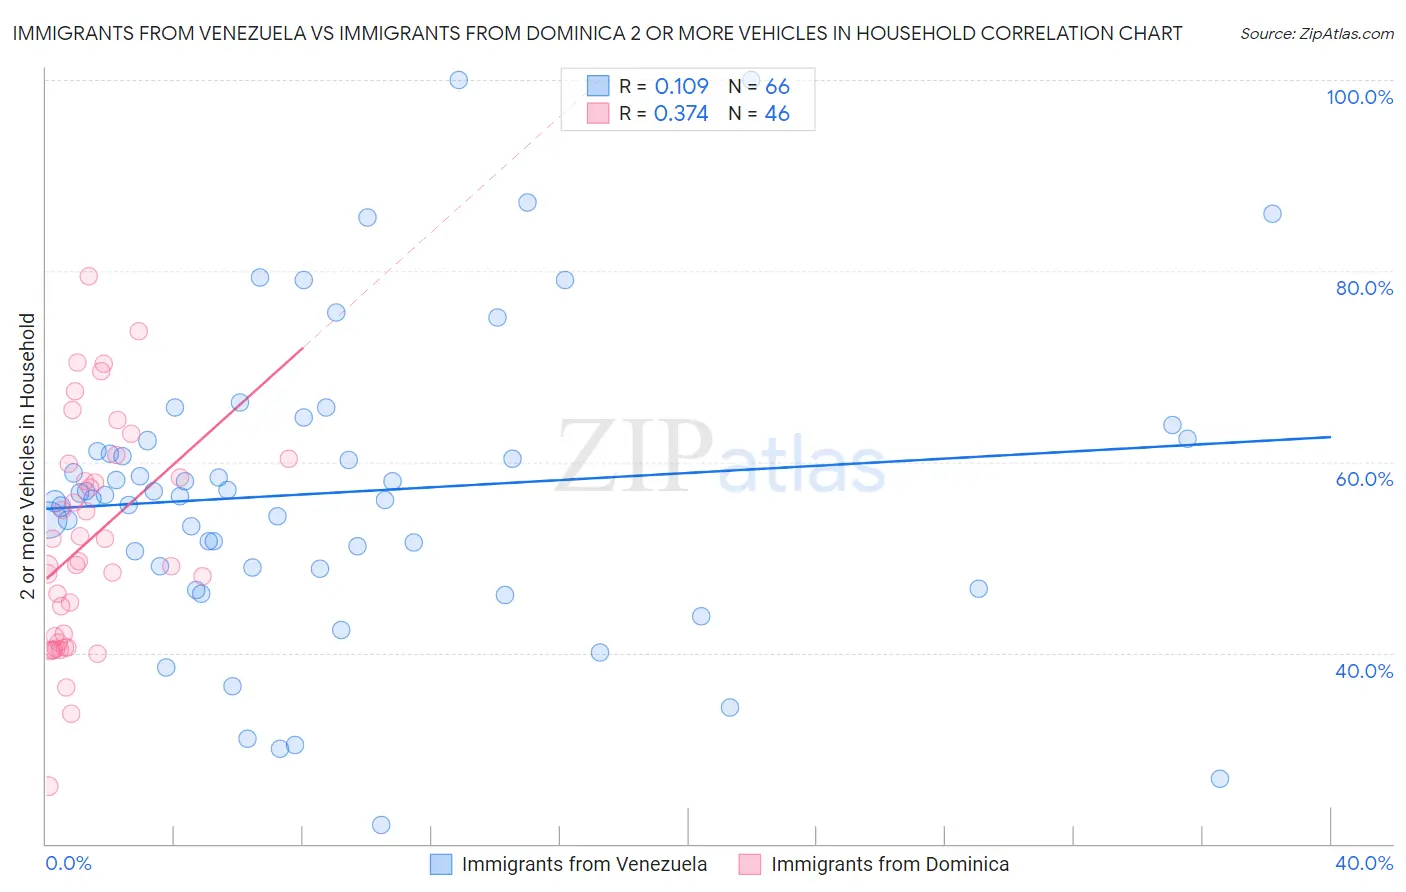 Immigrants from Venezuela vs Immigrants from Dominica 2 or more Vehicles in Household